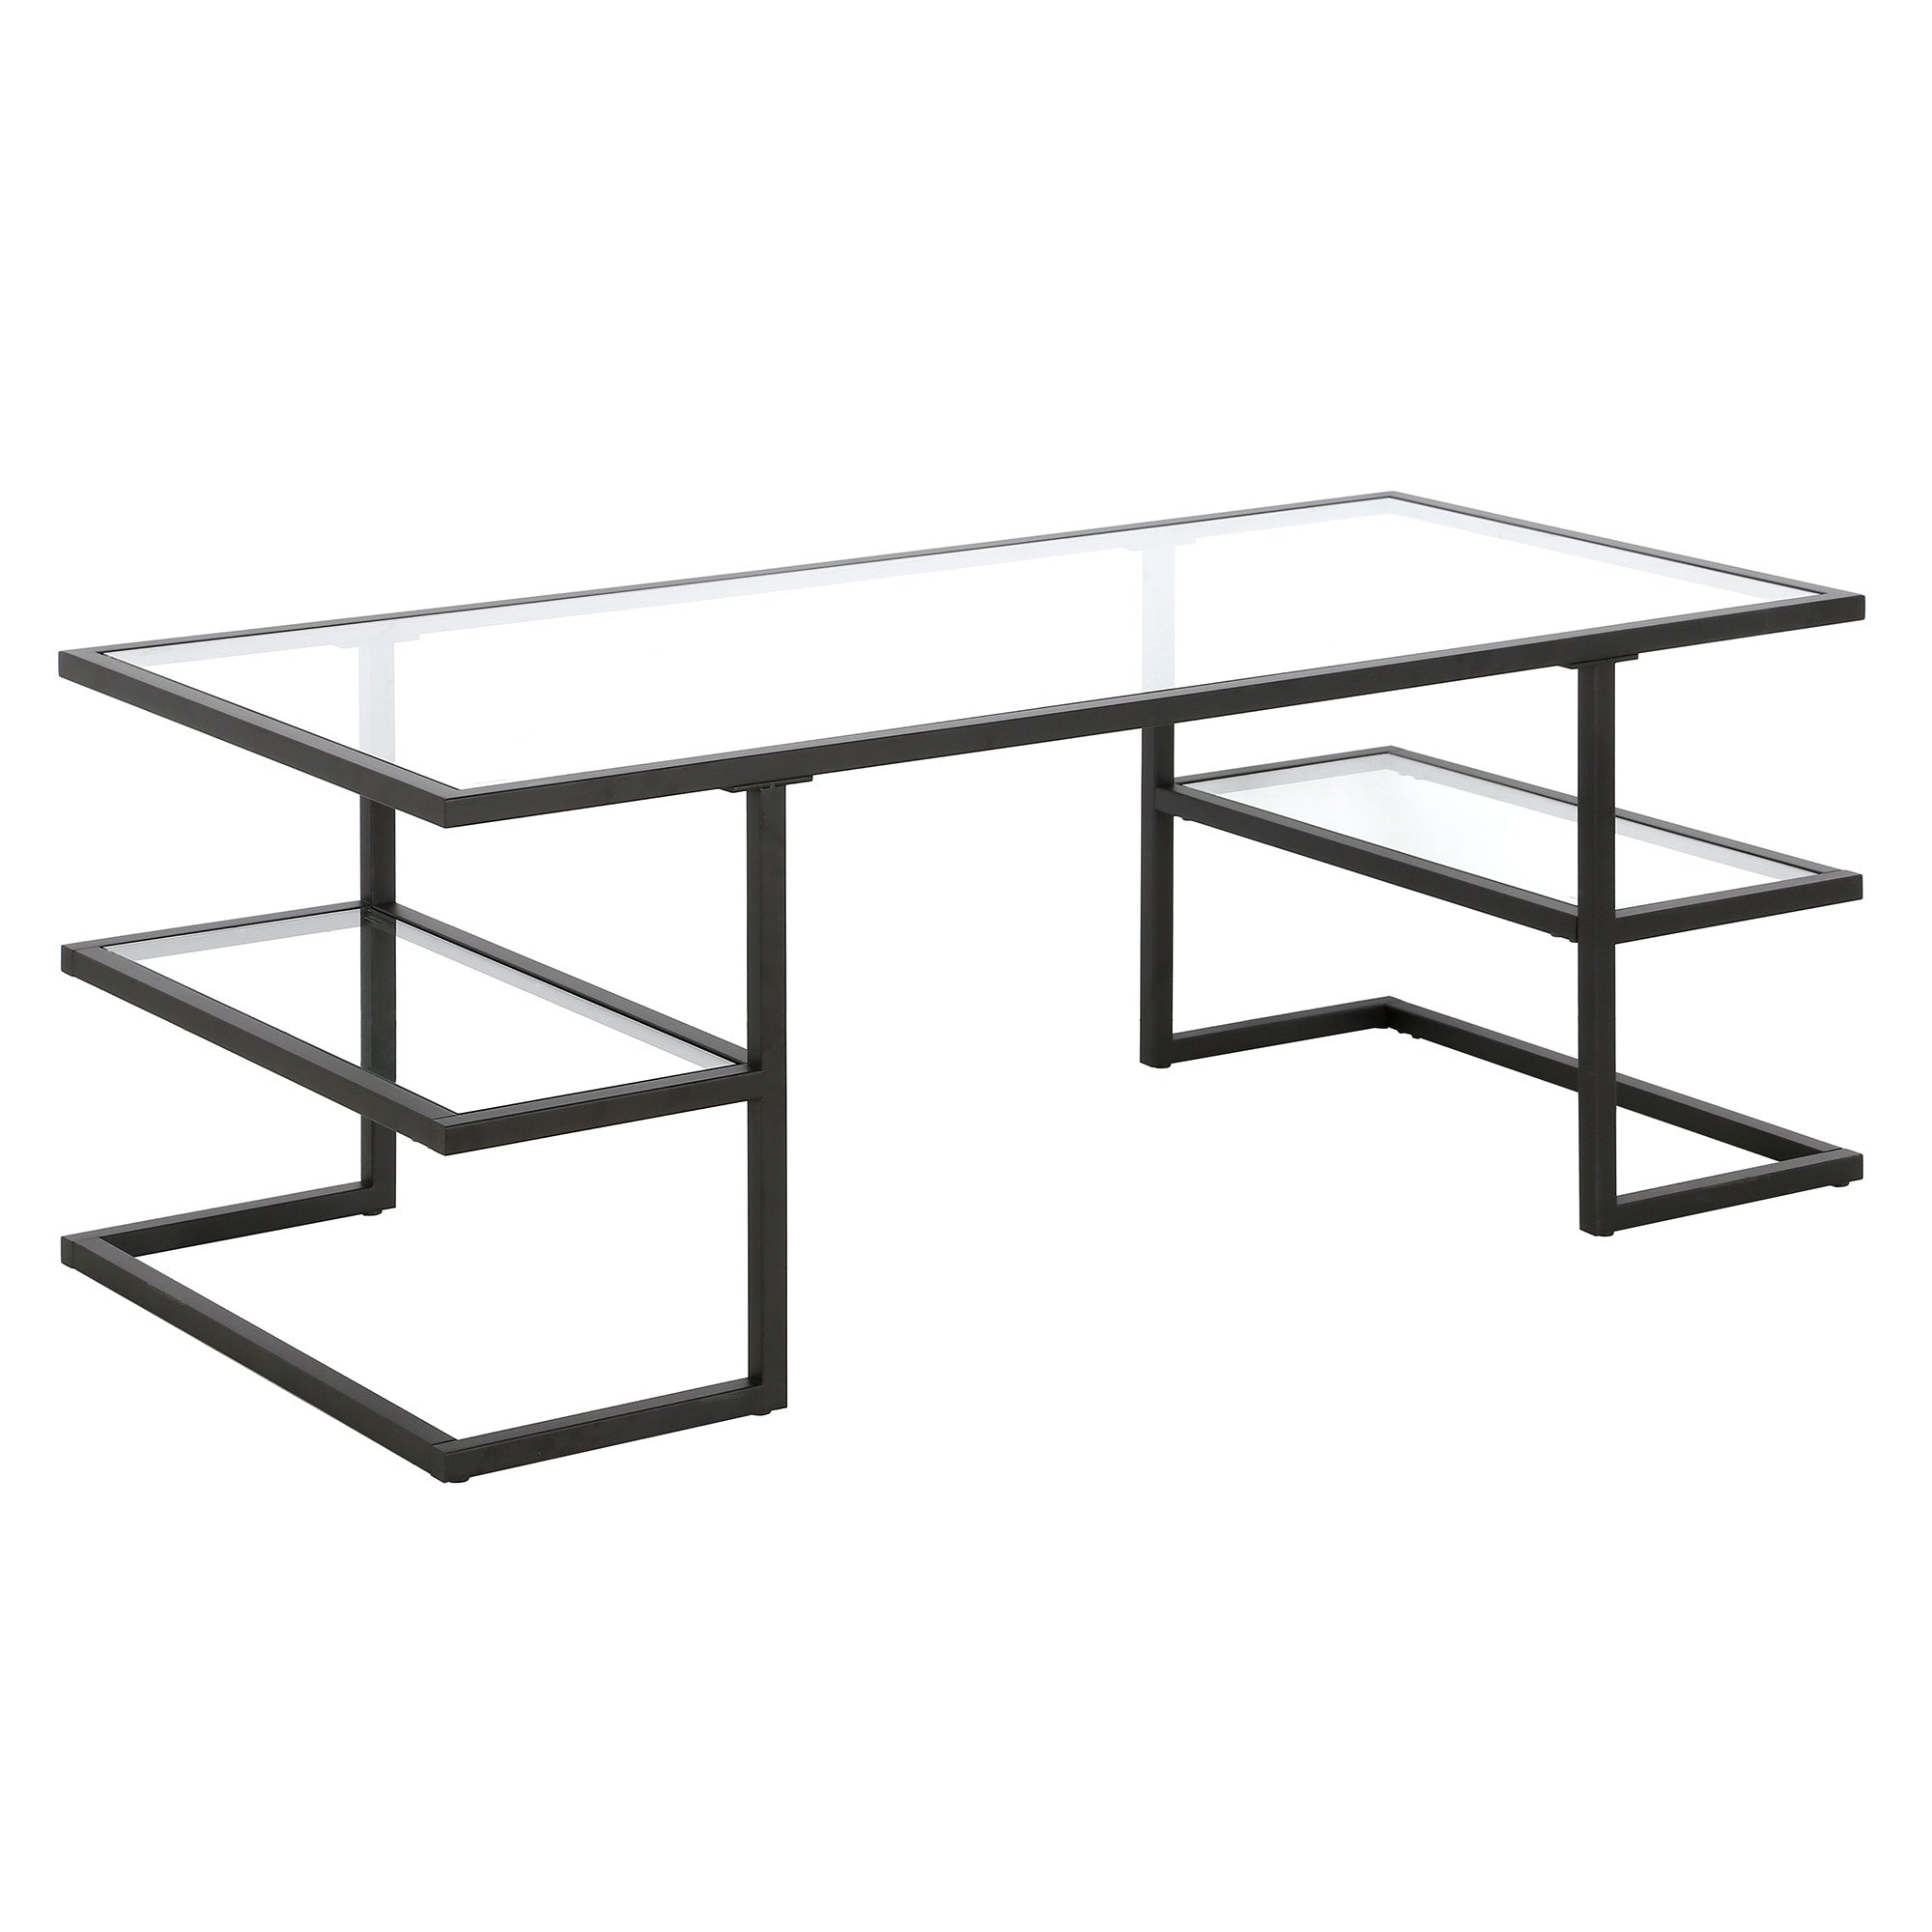 47" Black Glass And Steel Coffee Table With Two Shelves